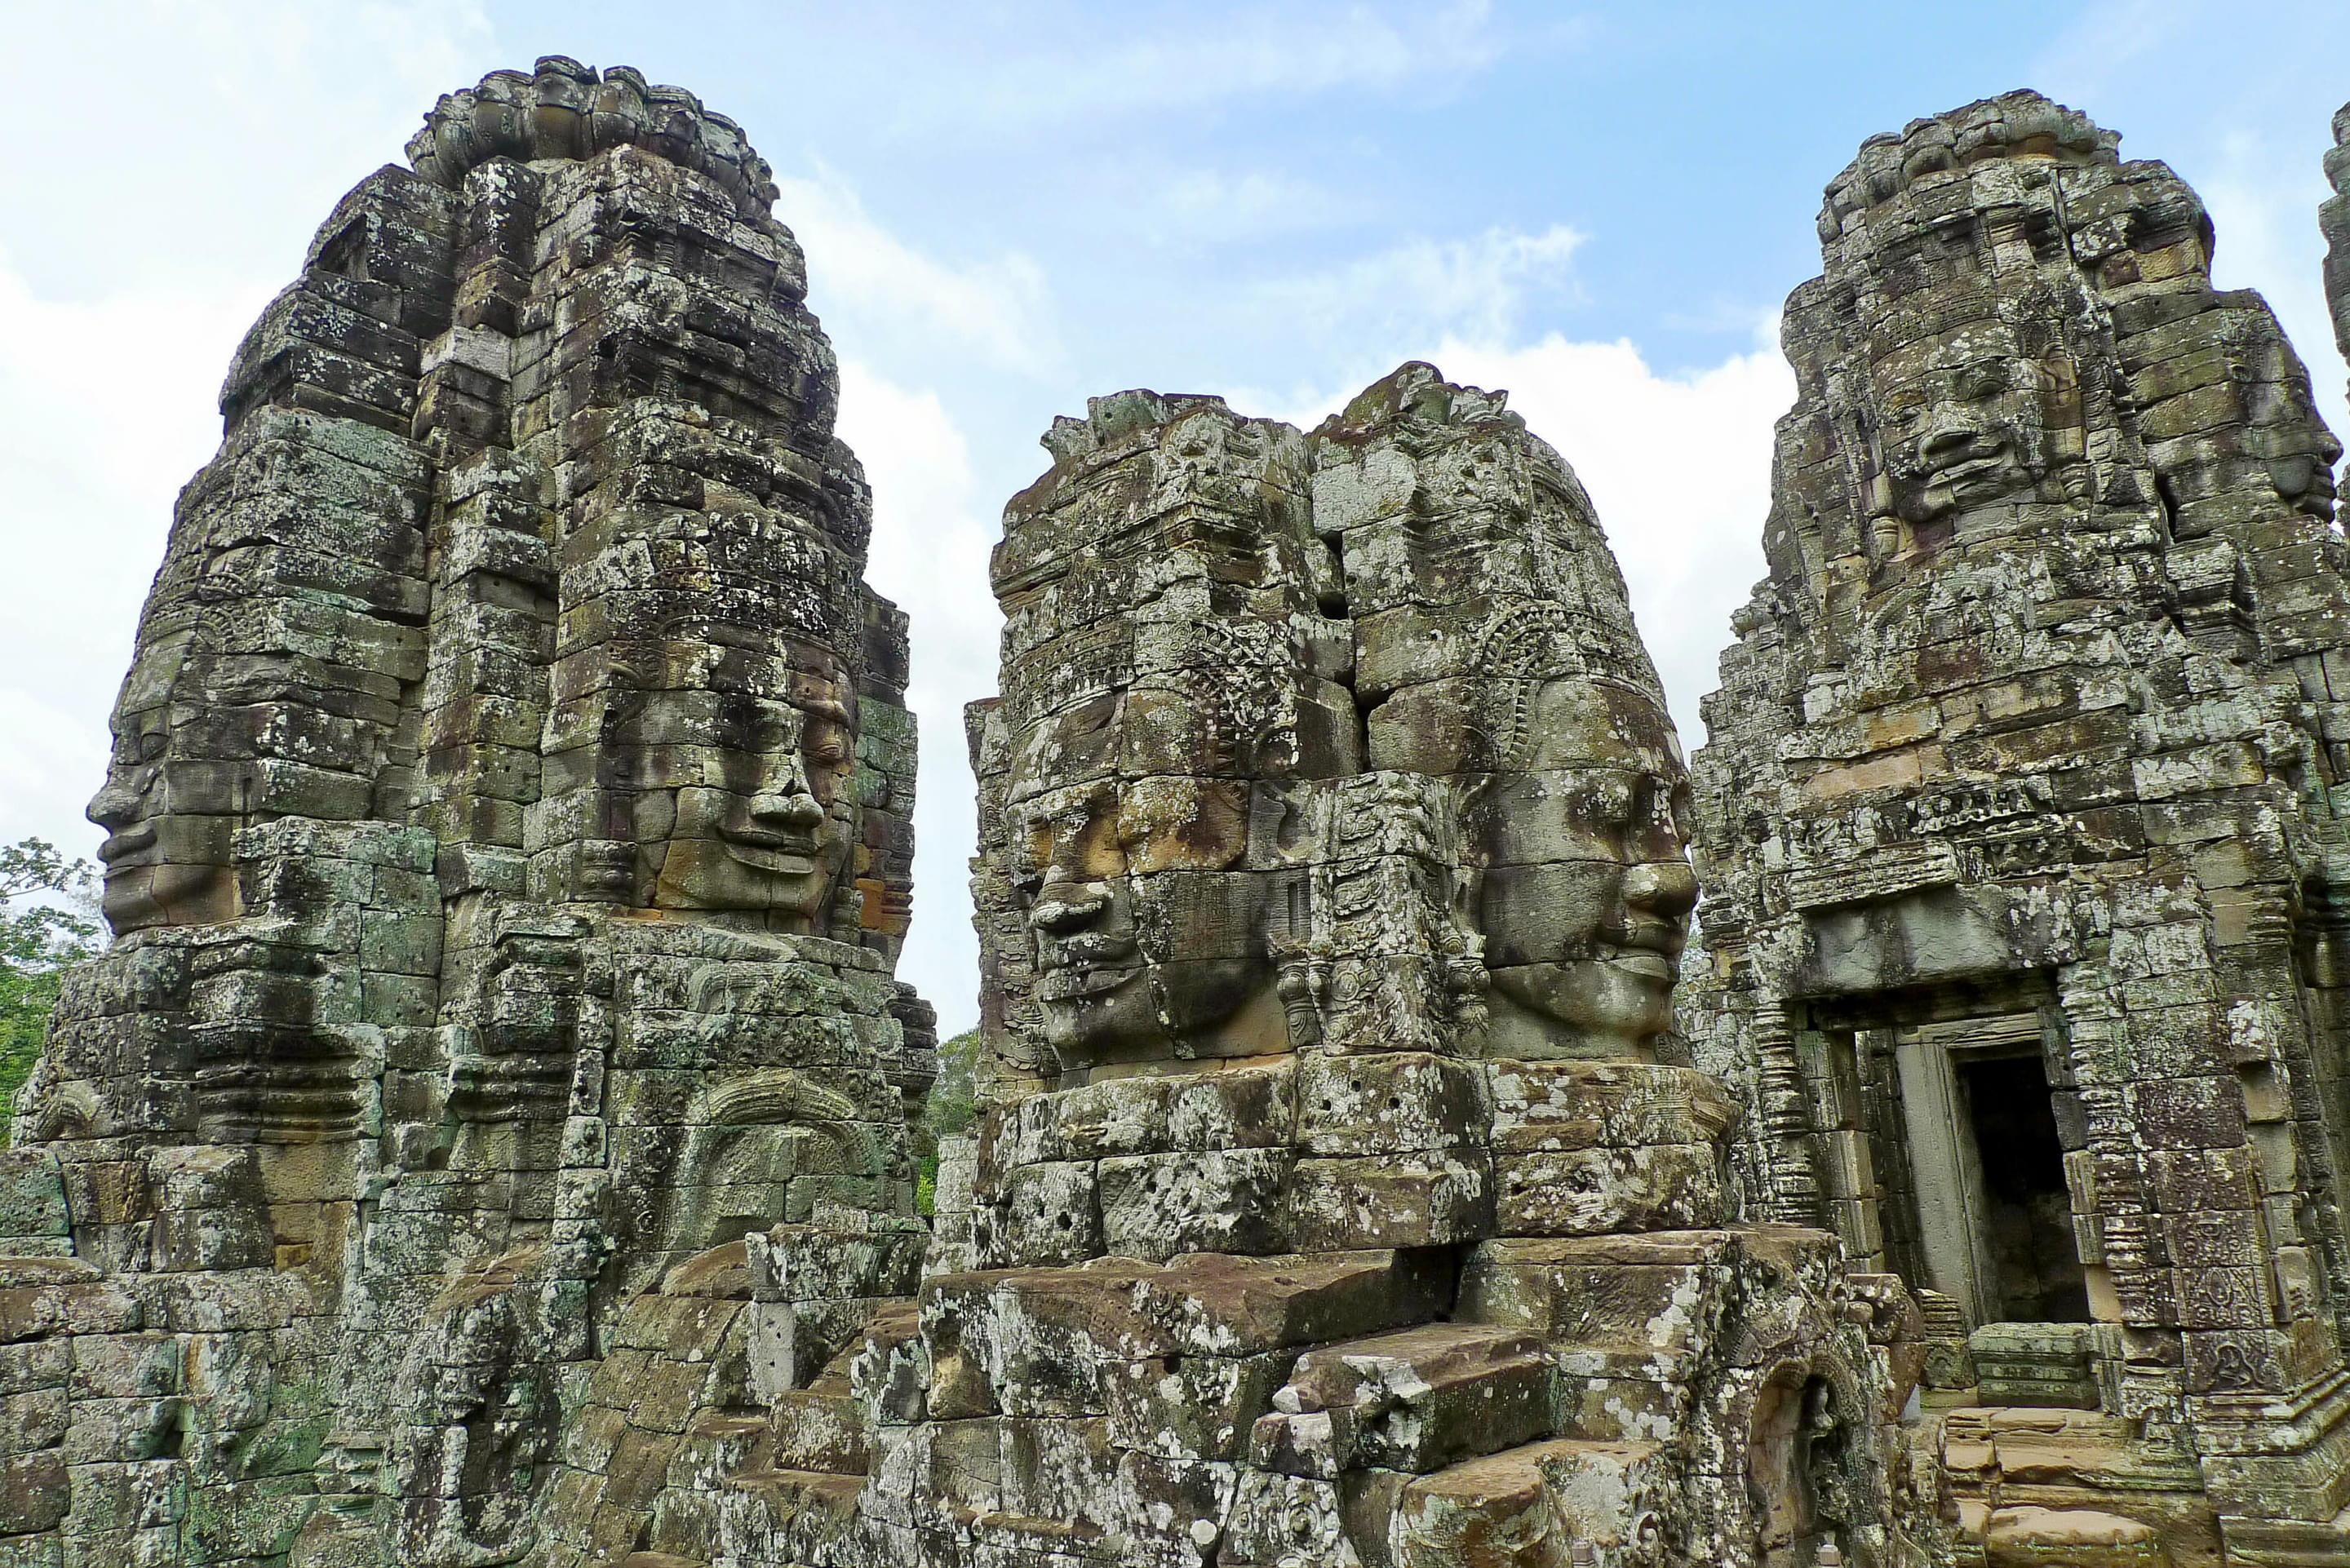 Angkor Thom Overview